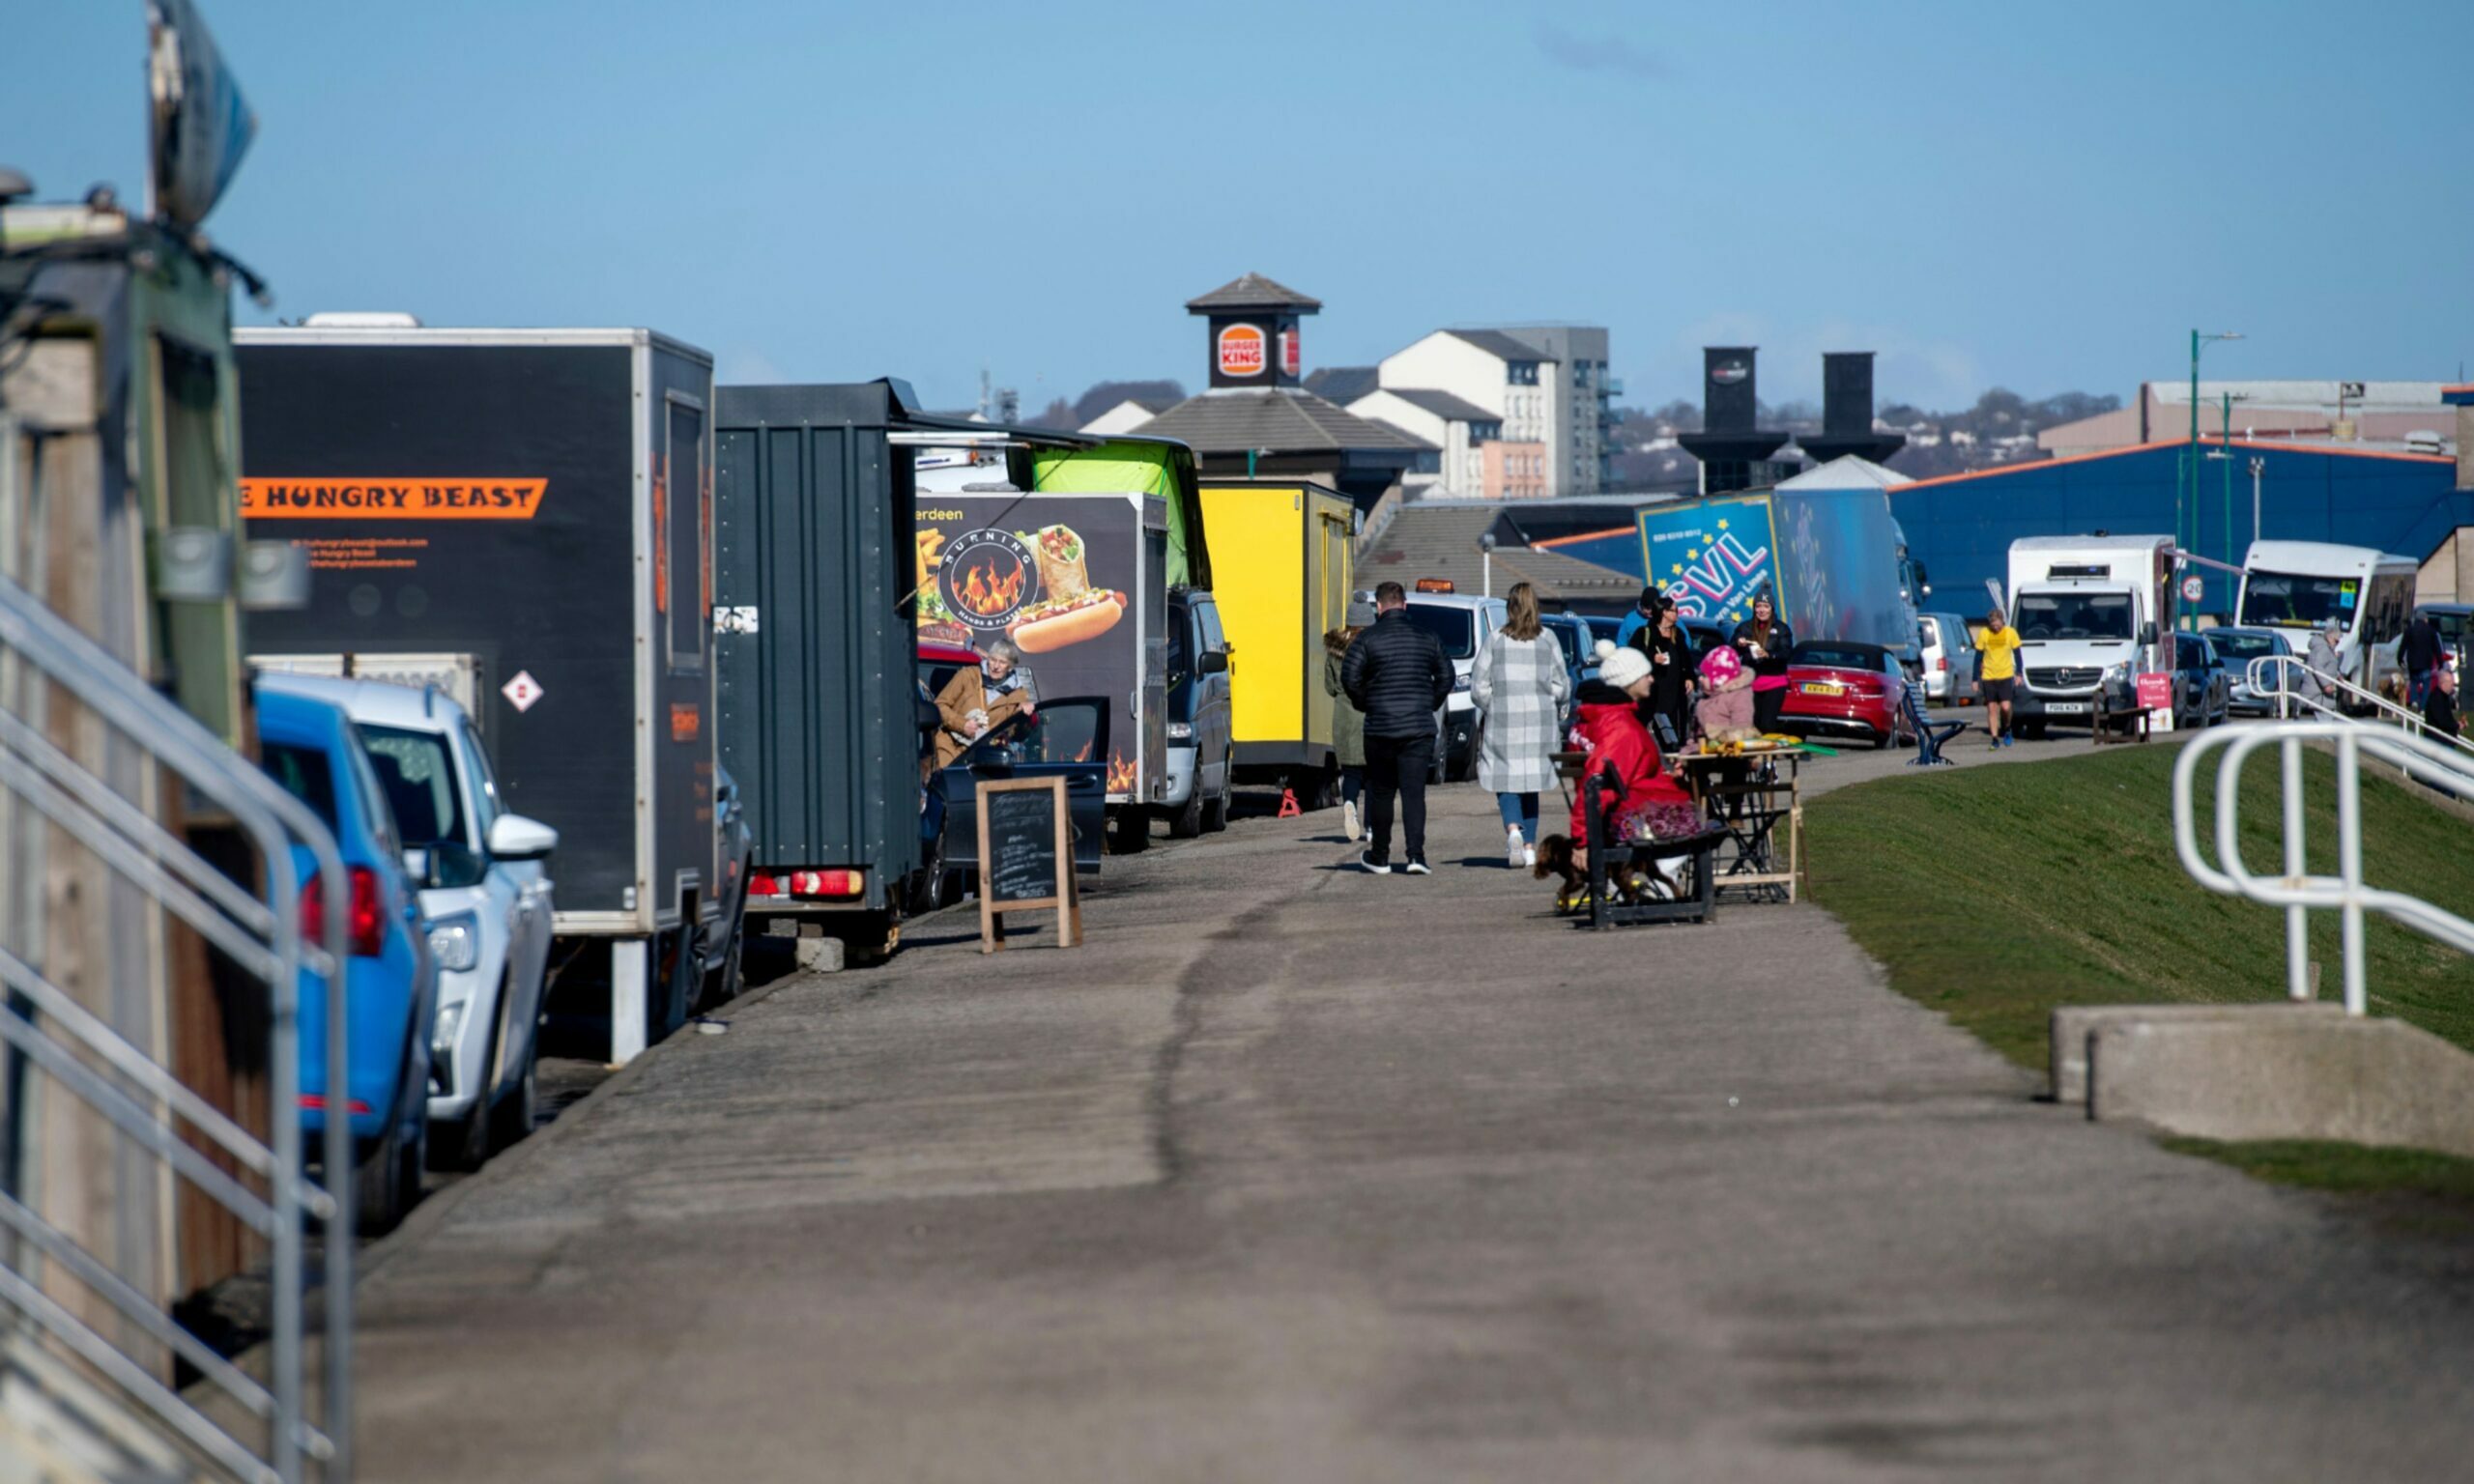 New Aberdeen Beach food trucks will add to a thriving seafront scene.